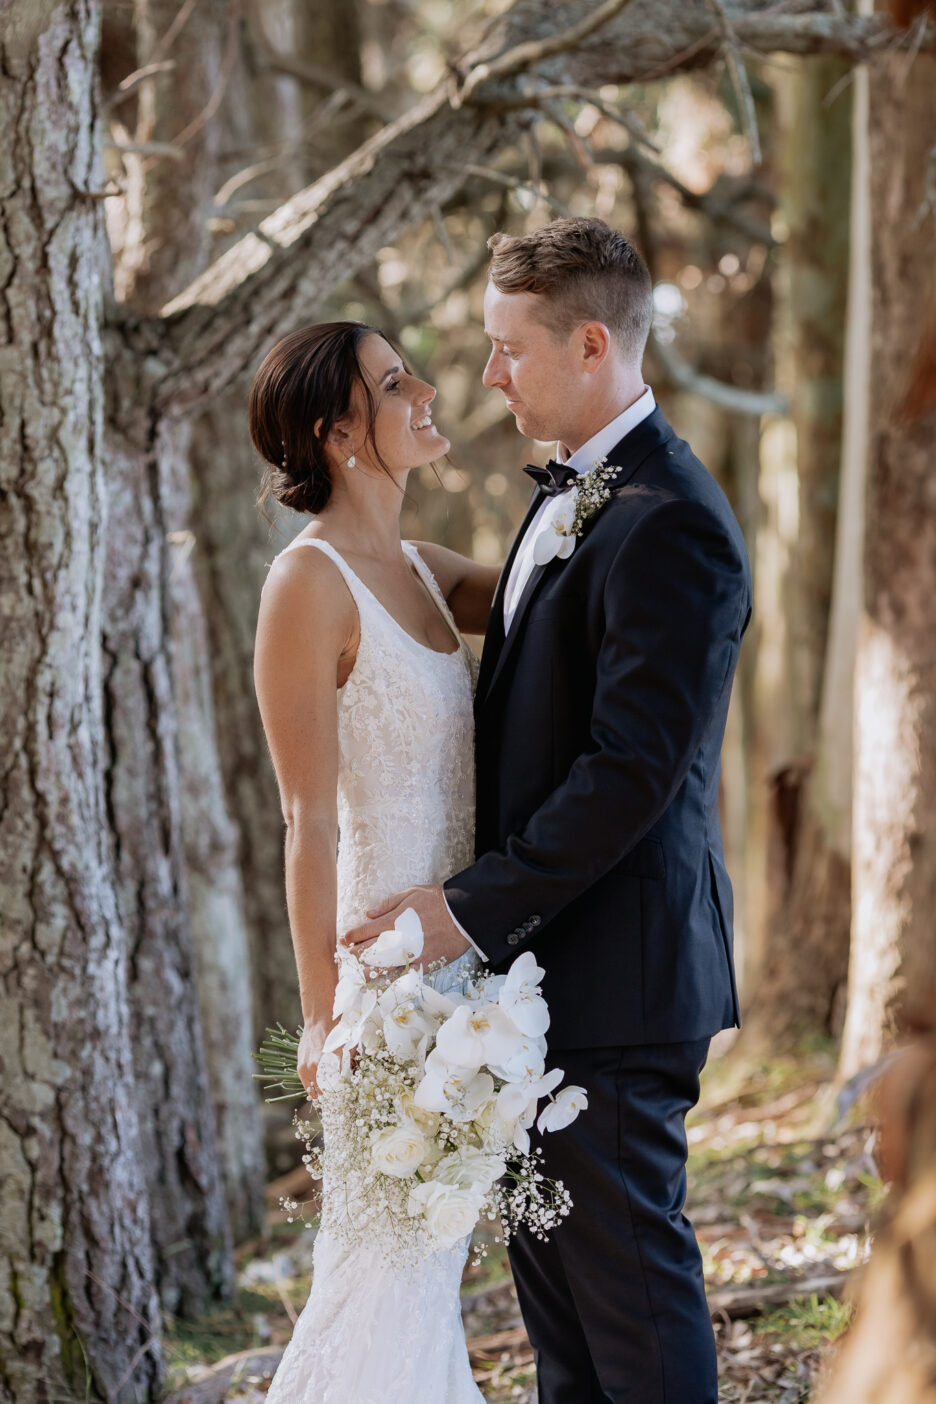 Bridal couple looking at each other in tree tunnel